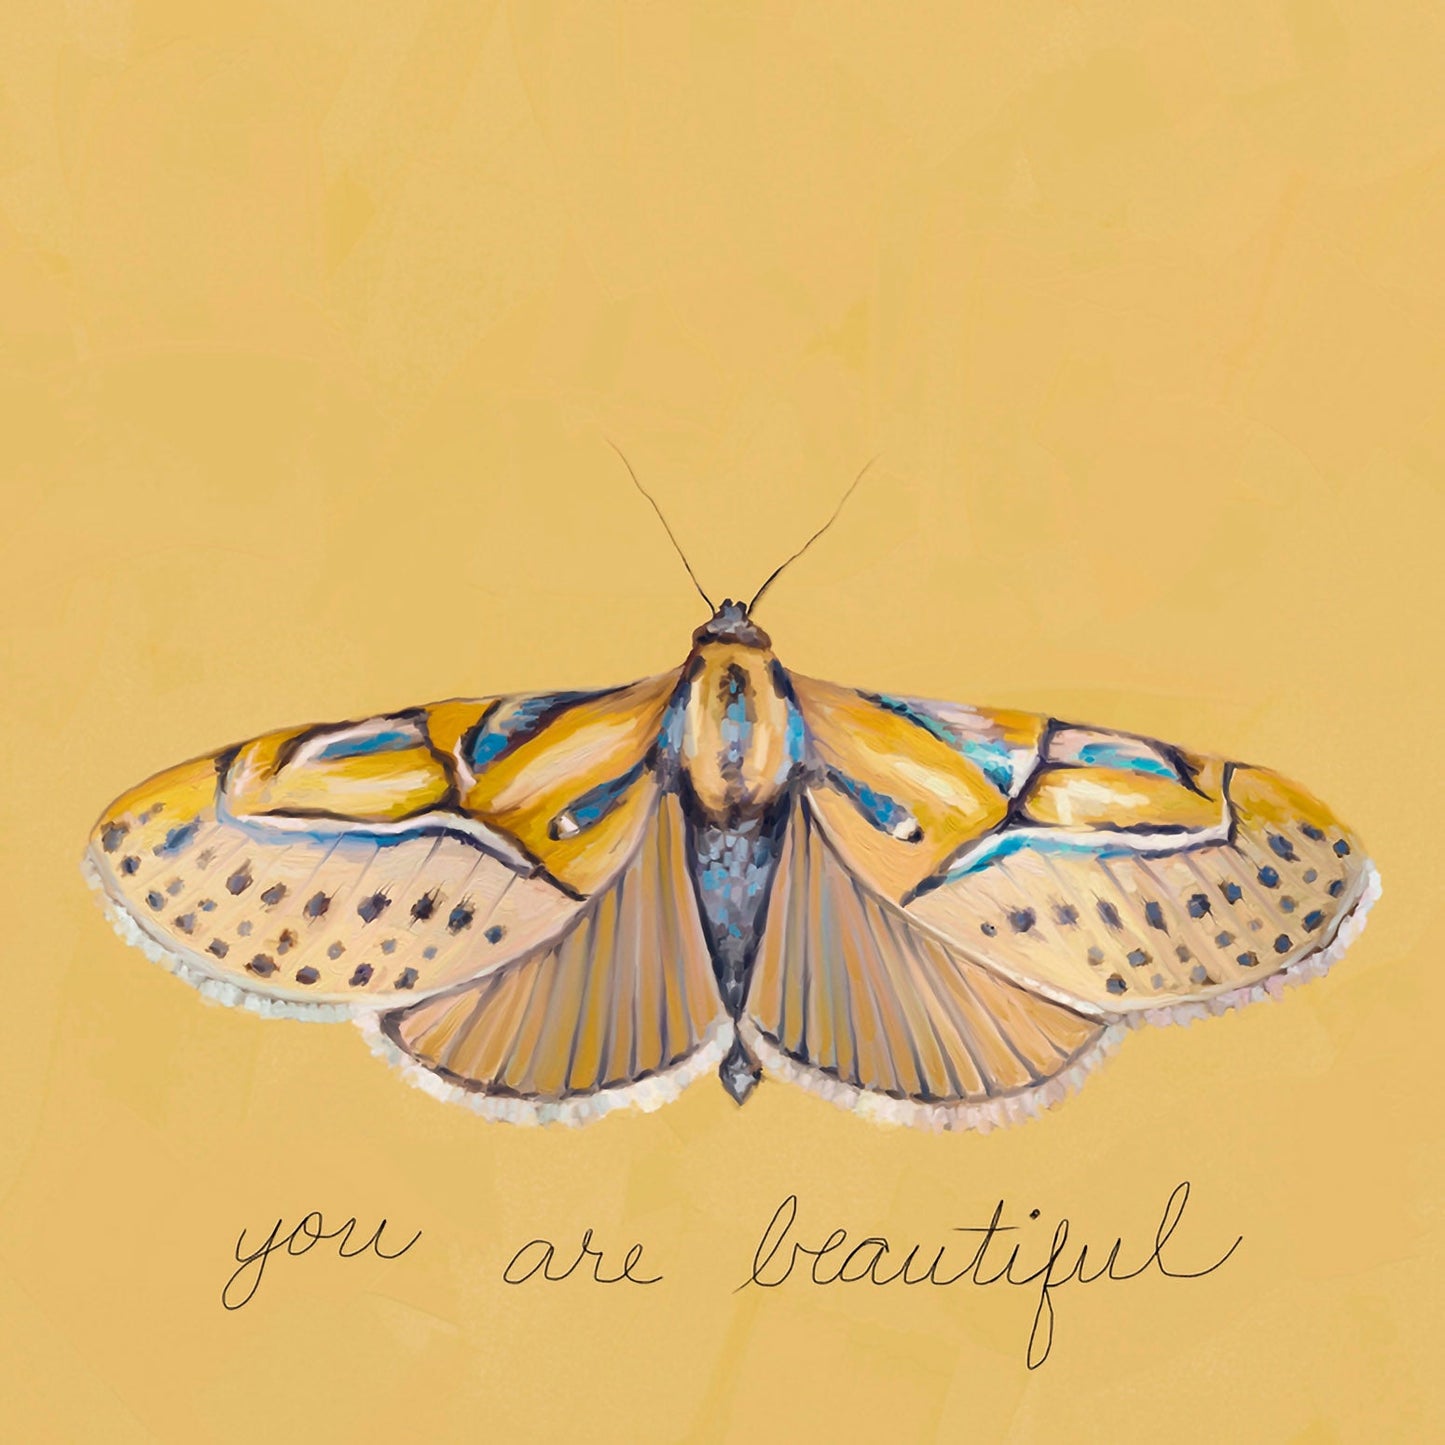 Inspirational Moths - You Are Beautiful Canvas Wall Art